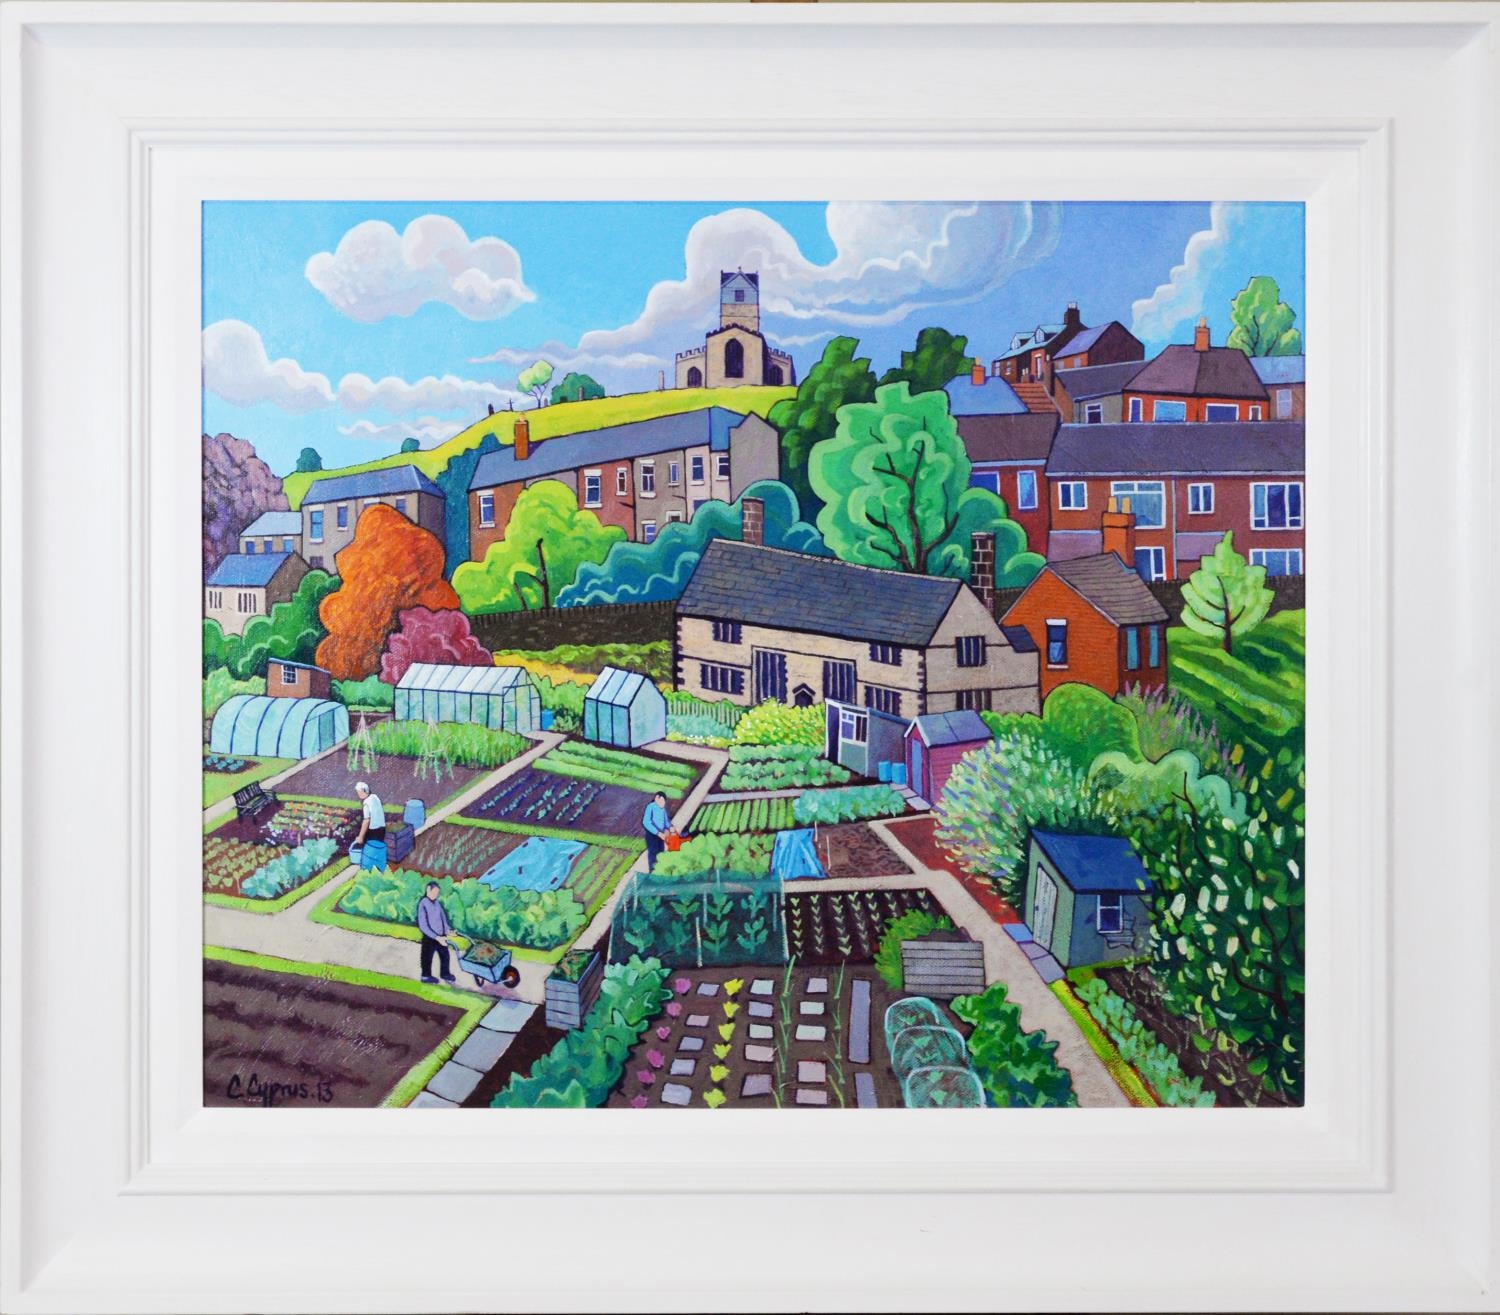 CHRIS CYPRUS OIL PAINTING ON CANVAS Figures working in allotments with St Leonard's Church on hill - Image 2 of 2